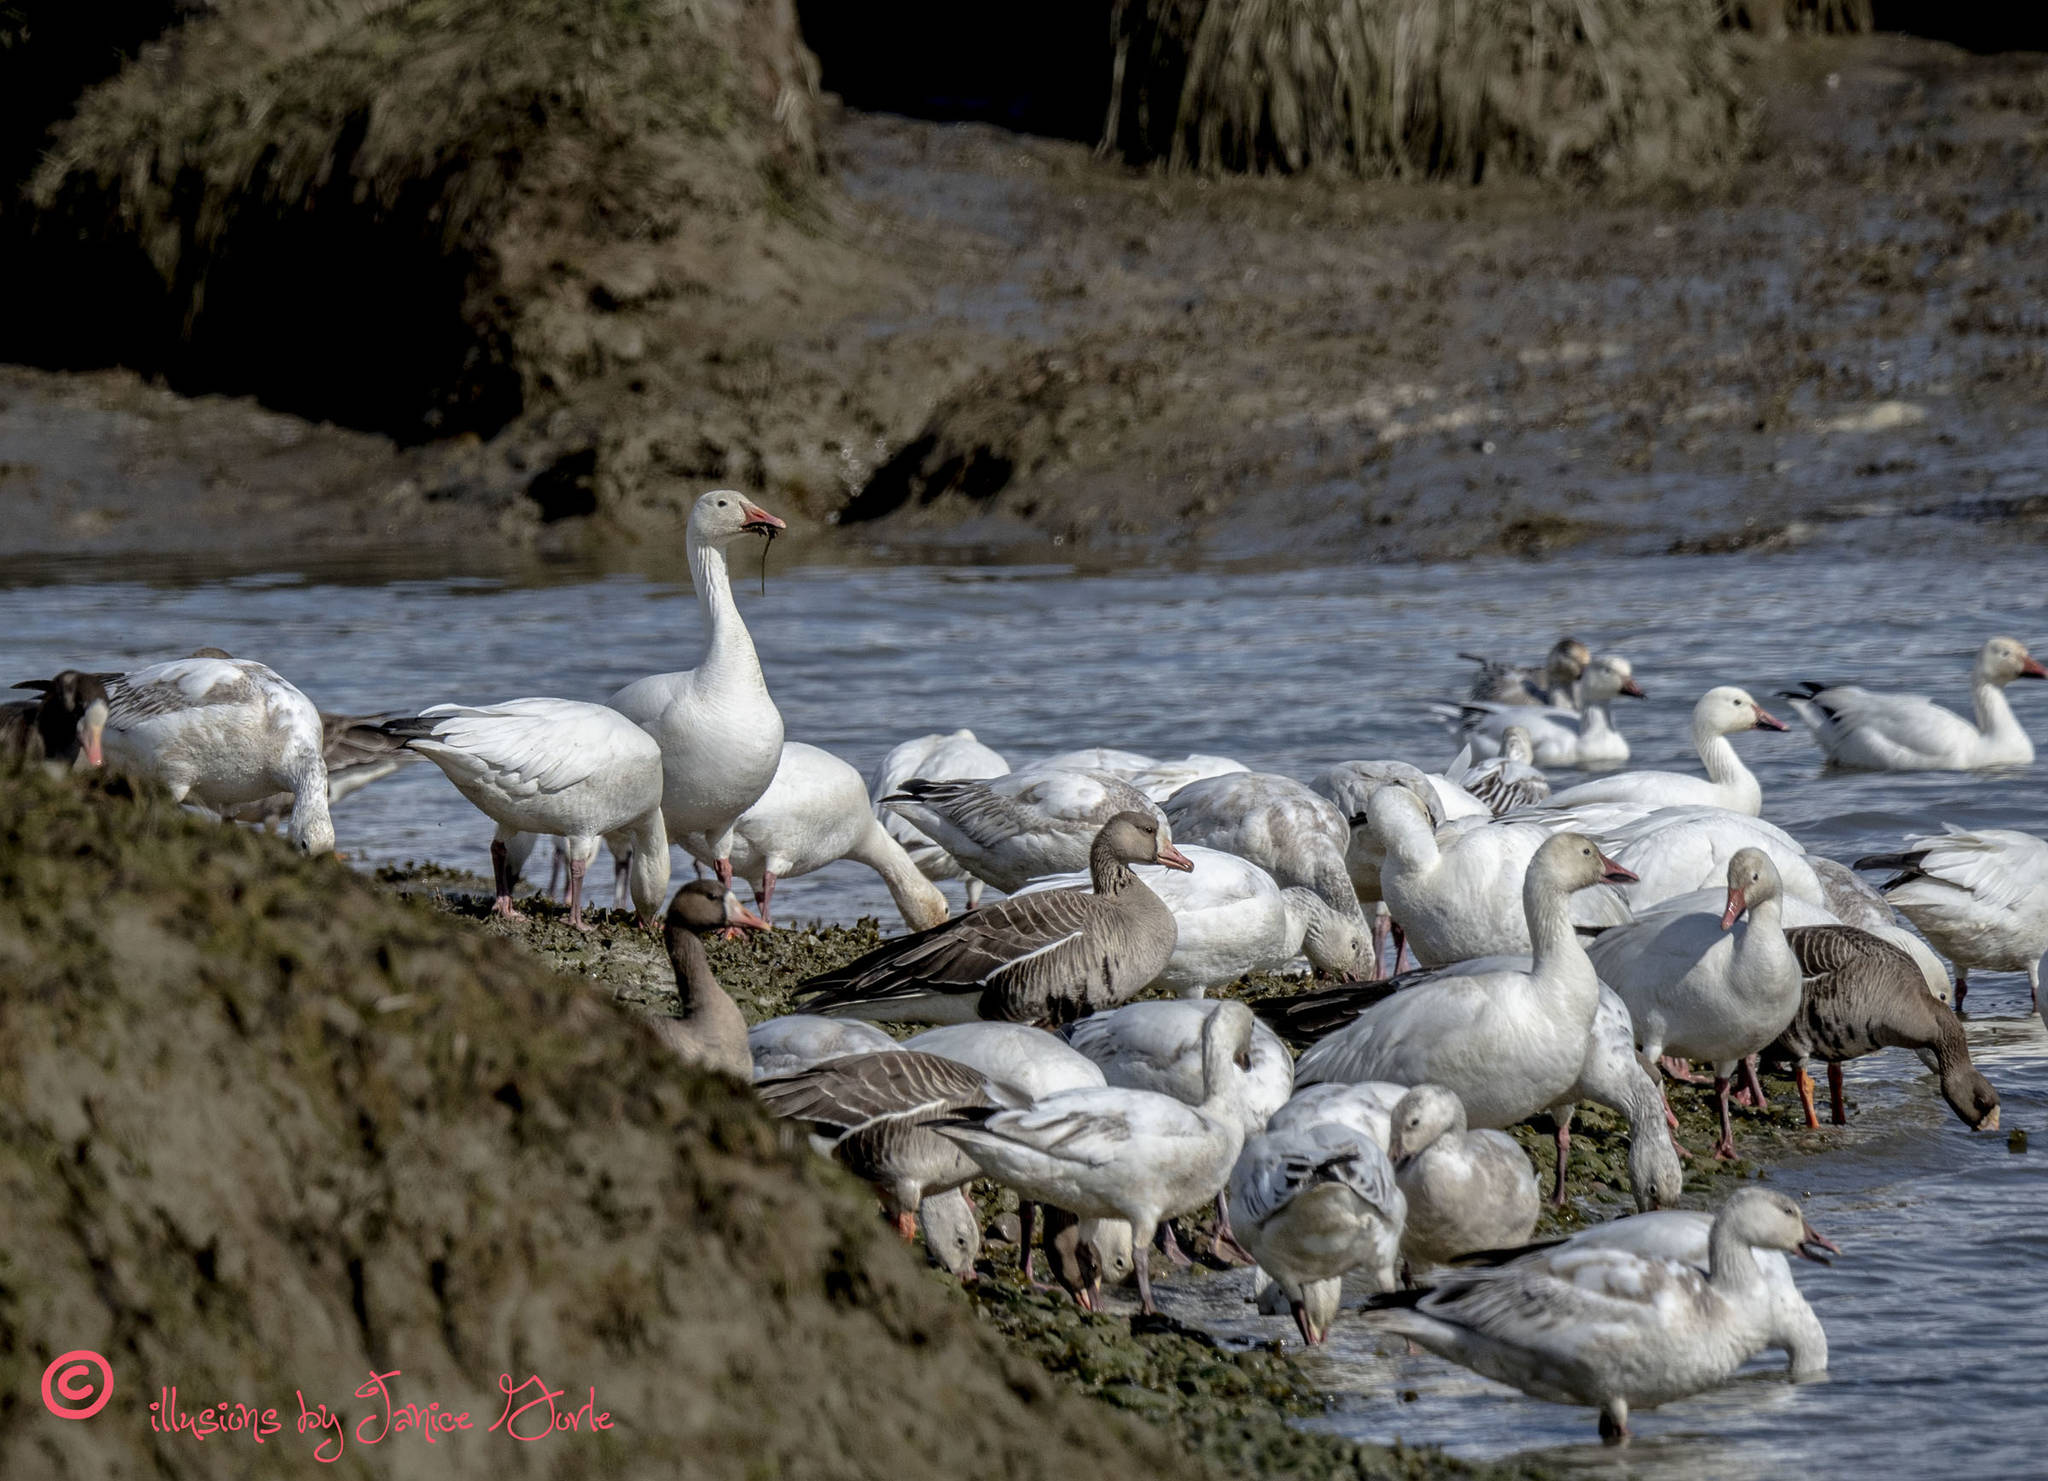 A gathering of Snow Geese and Greater White-fronted Geese at the airport wetlands. (Photo by Janice Gorle)